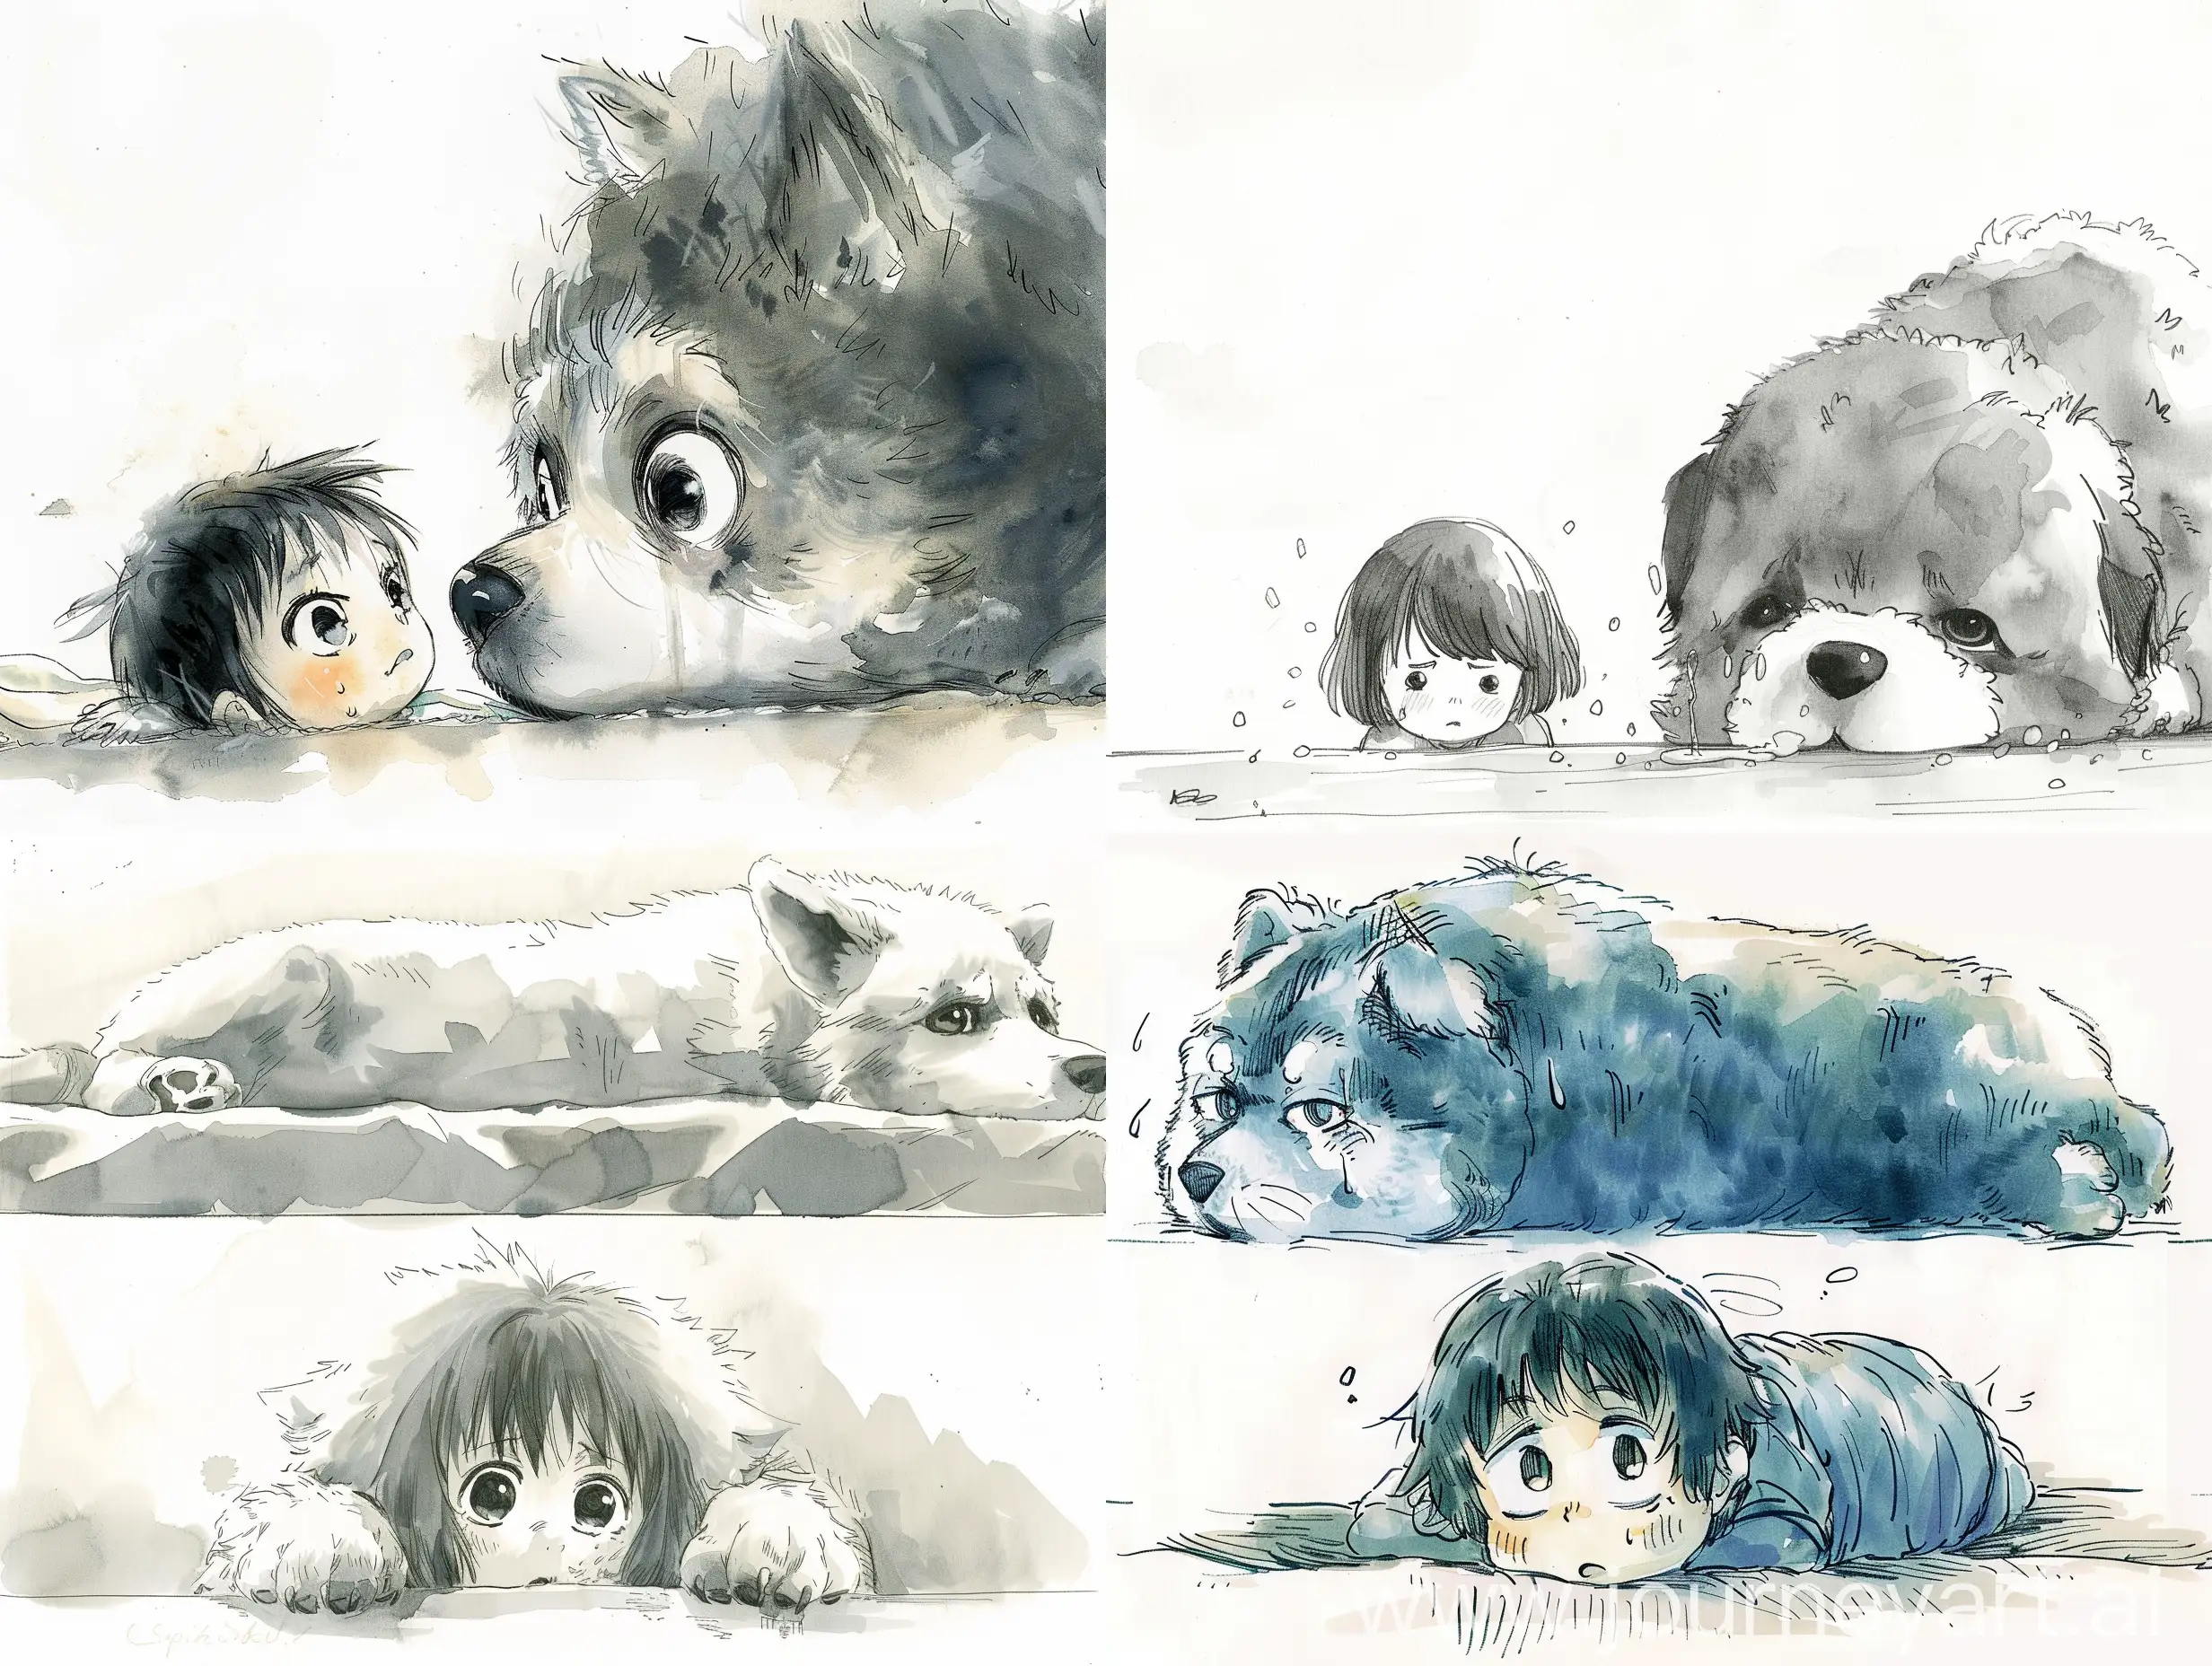 Child-Grieving-Over-Beloved-Old-Dog-in-Manga-Art-Style